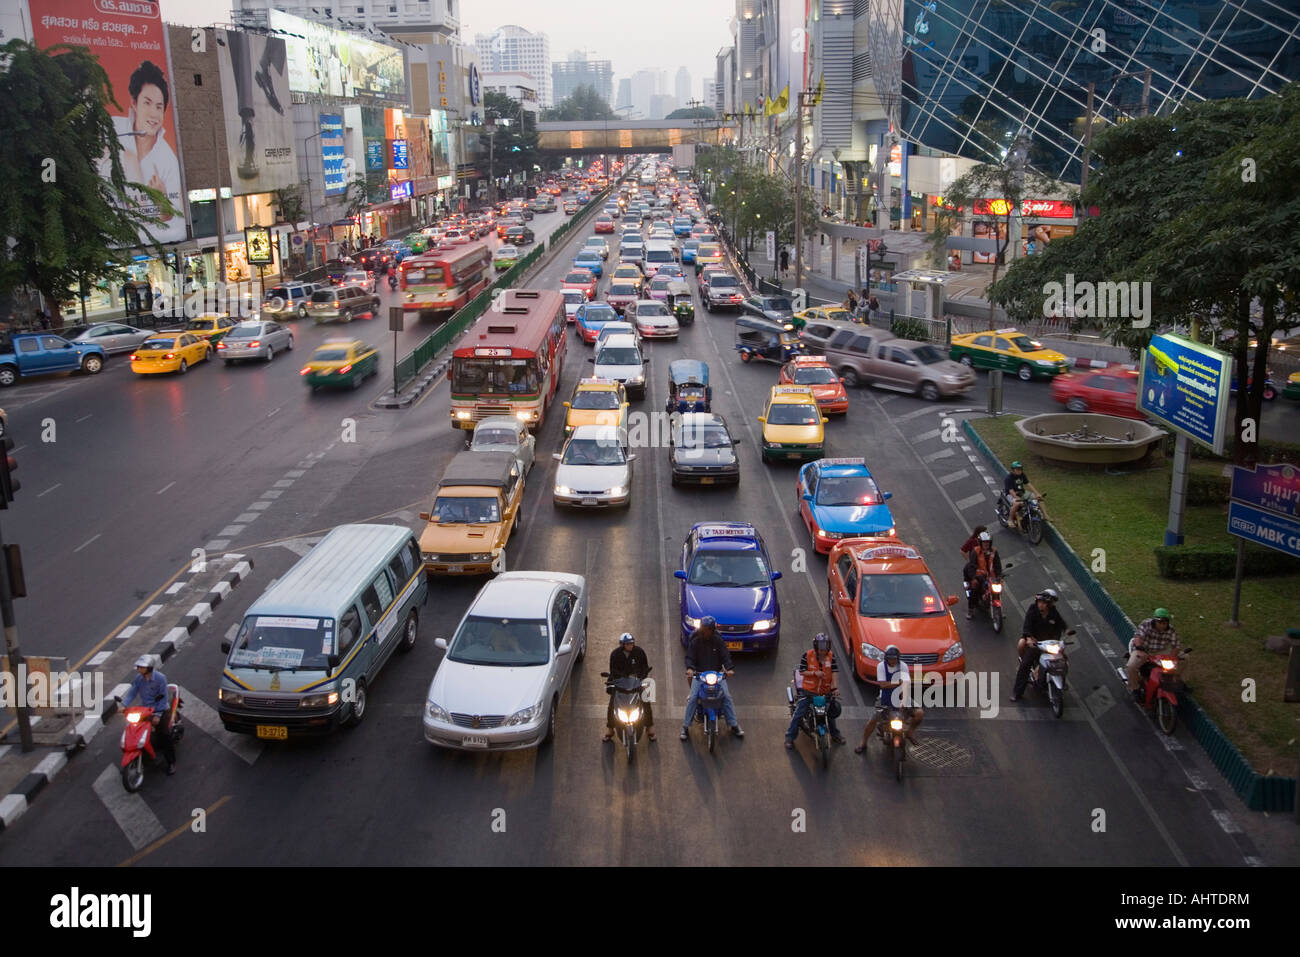 Rush hour commute traffic in the Siam Square district, Bangkok, Thailand Stock Photo